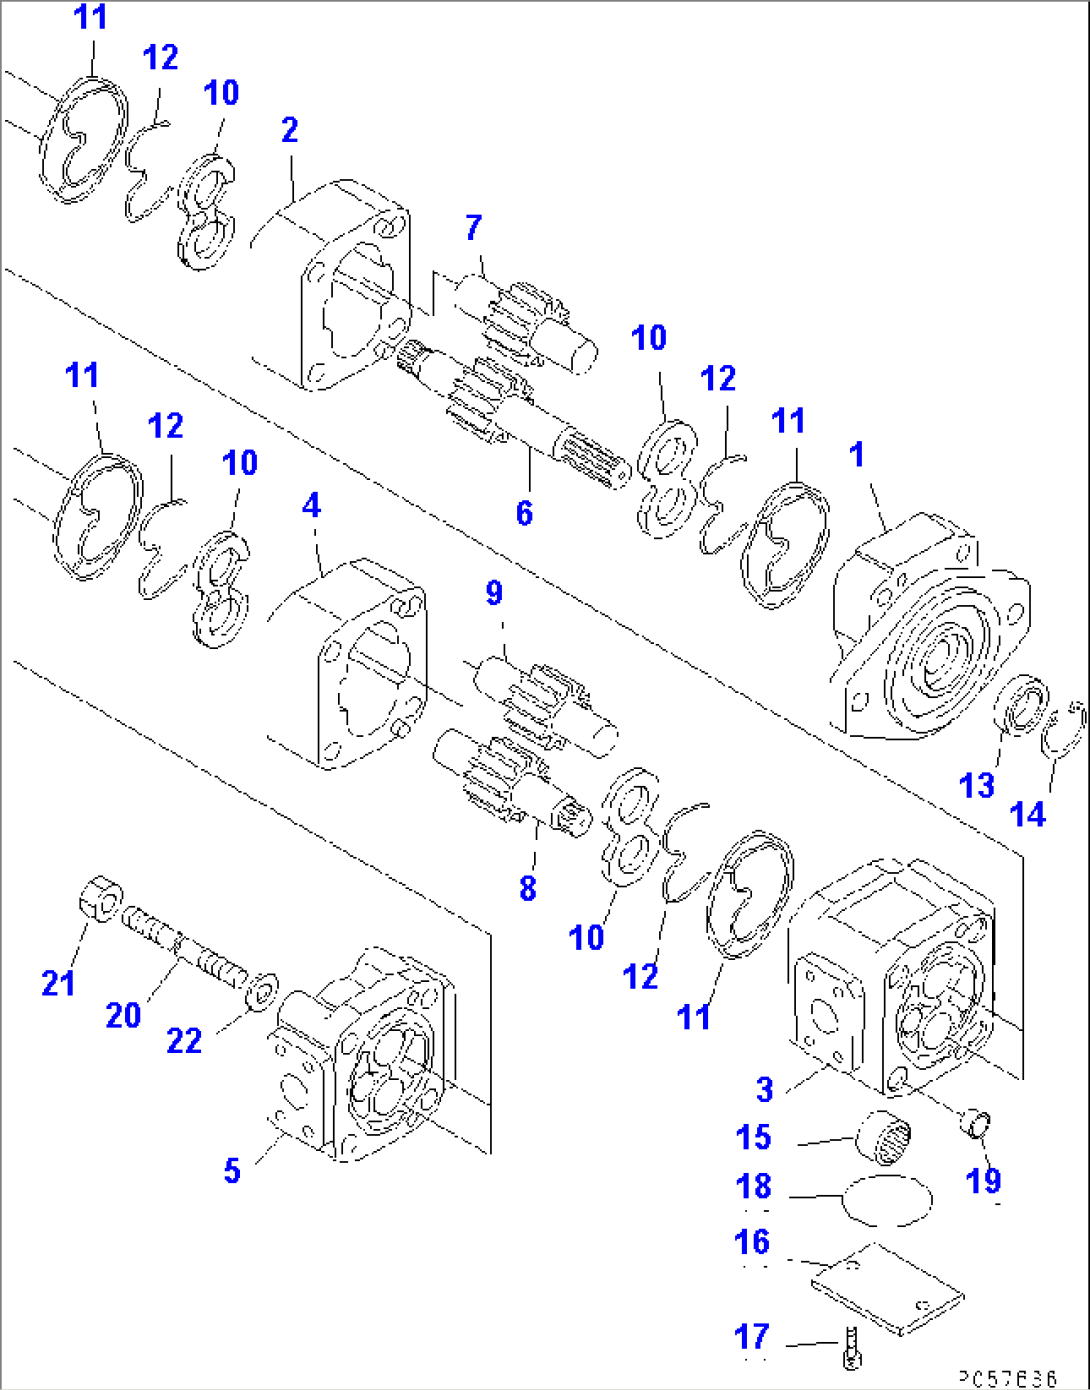 HYDRAULIC PUMP (FOR WORK EQUIPMENT AND STEERING)(#4732-)